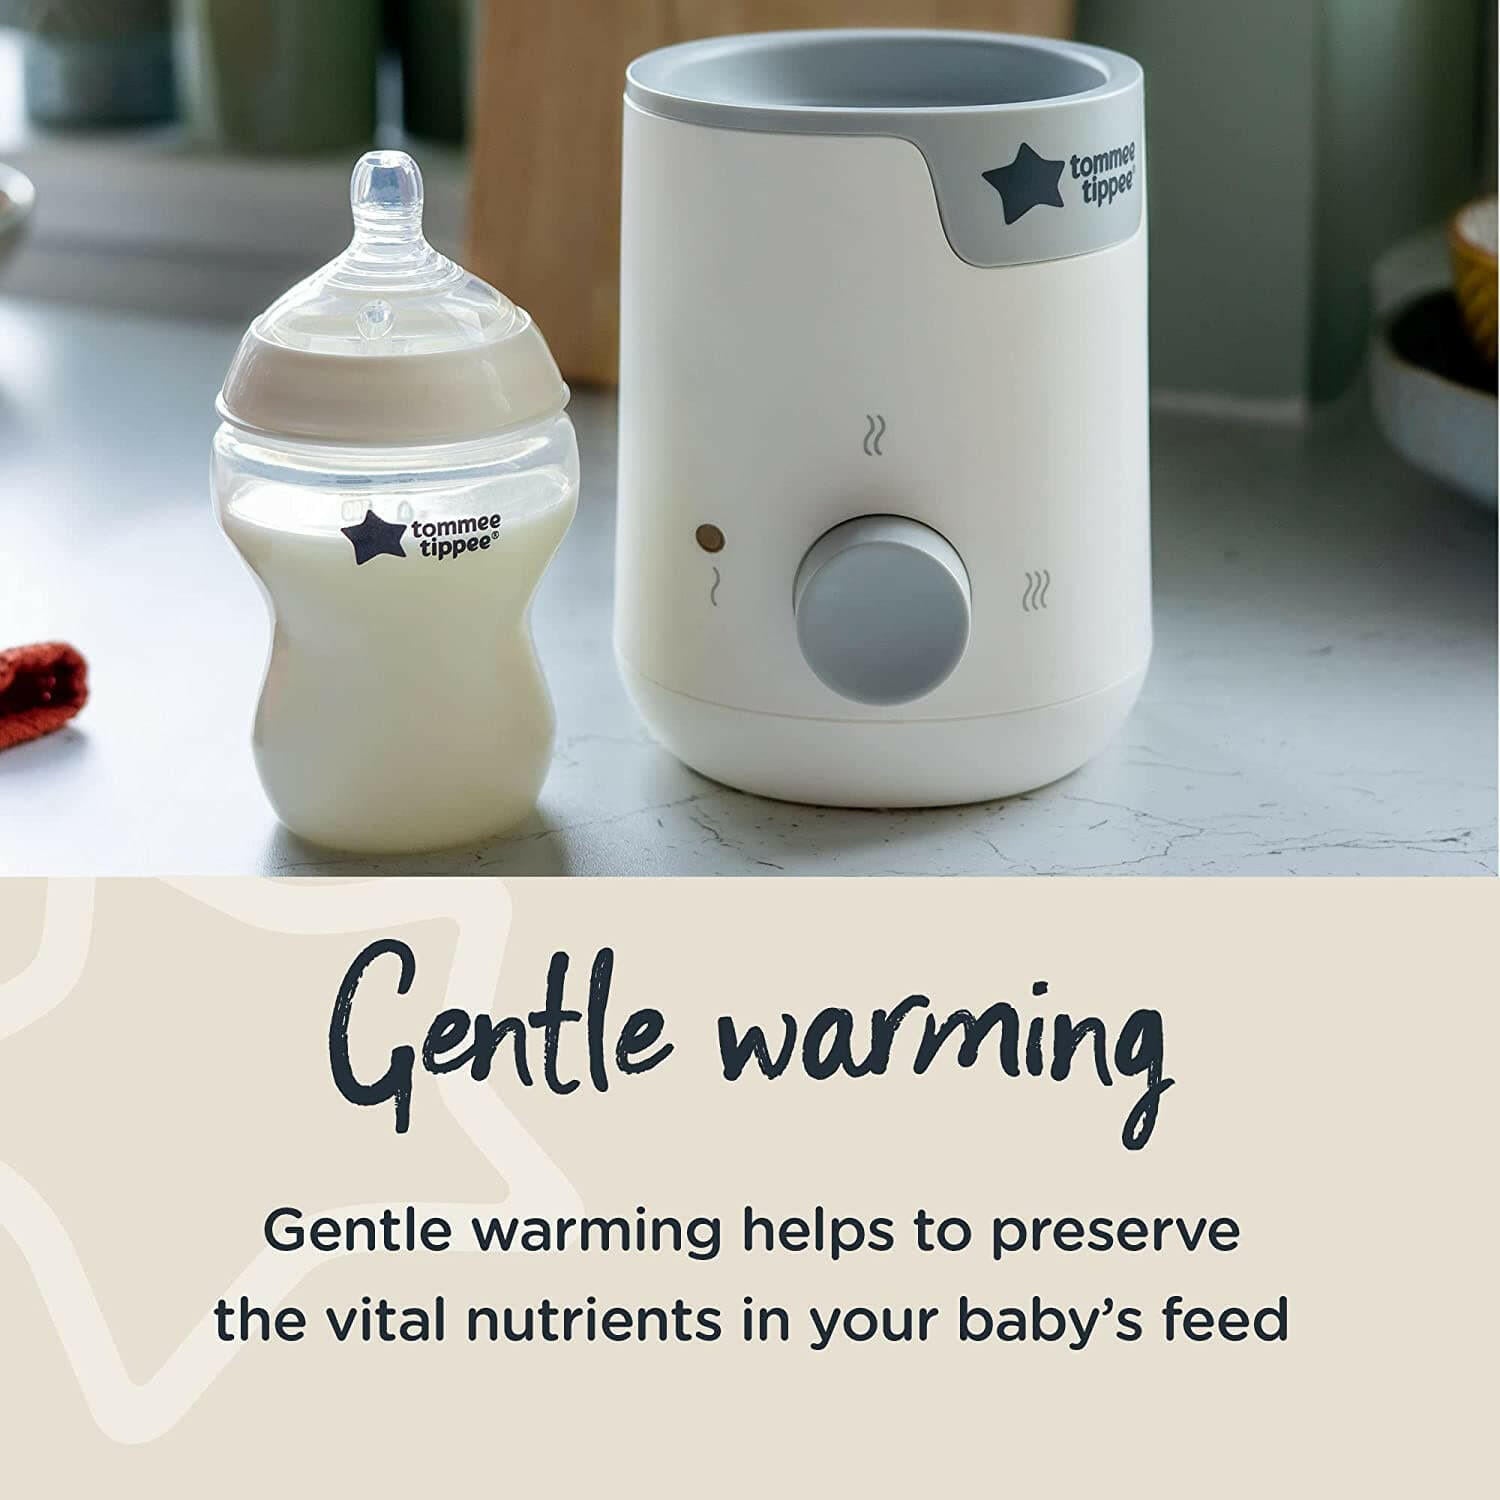 Tommee Tippee Electric Bottle And Food Warmer For Baby Feeding.